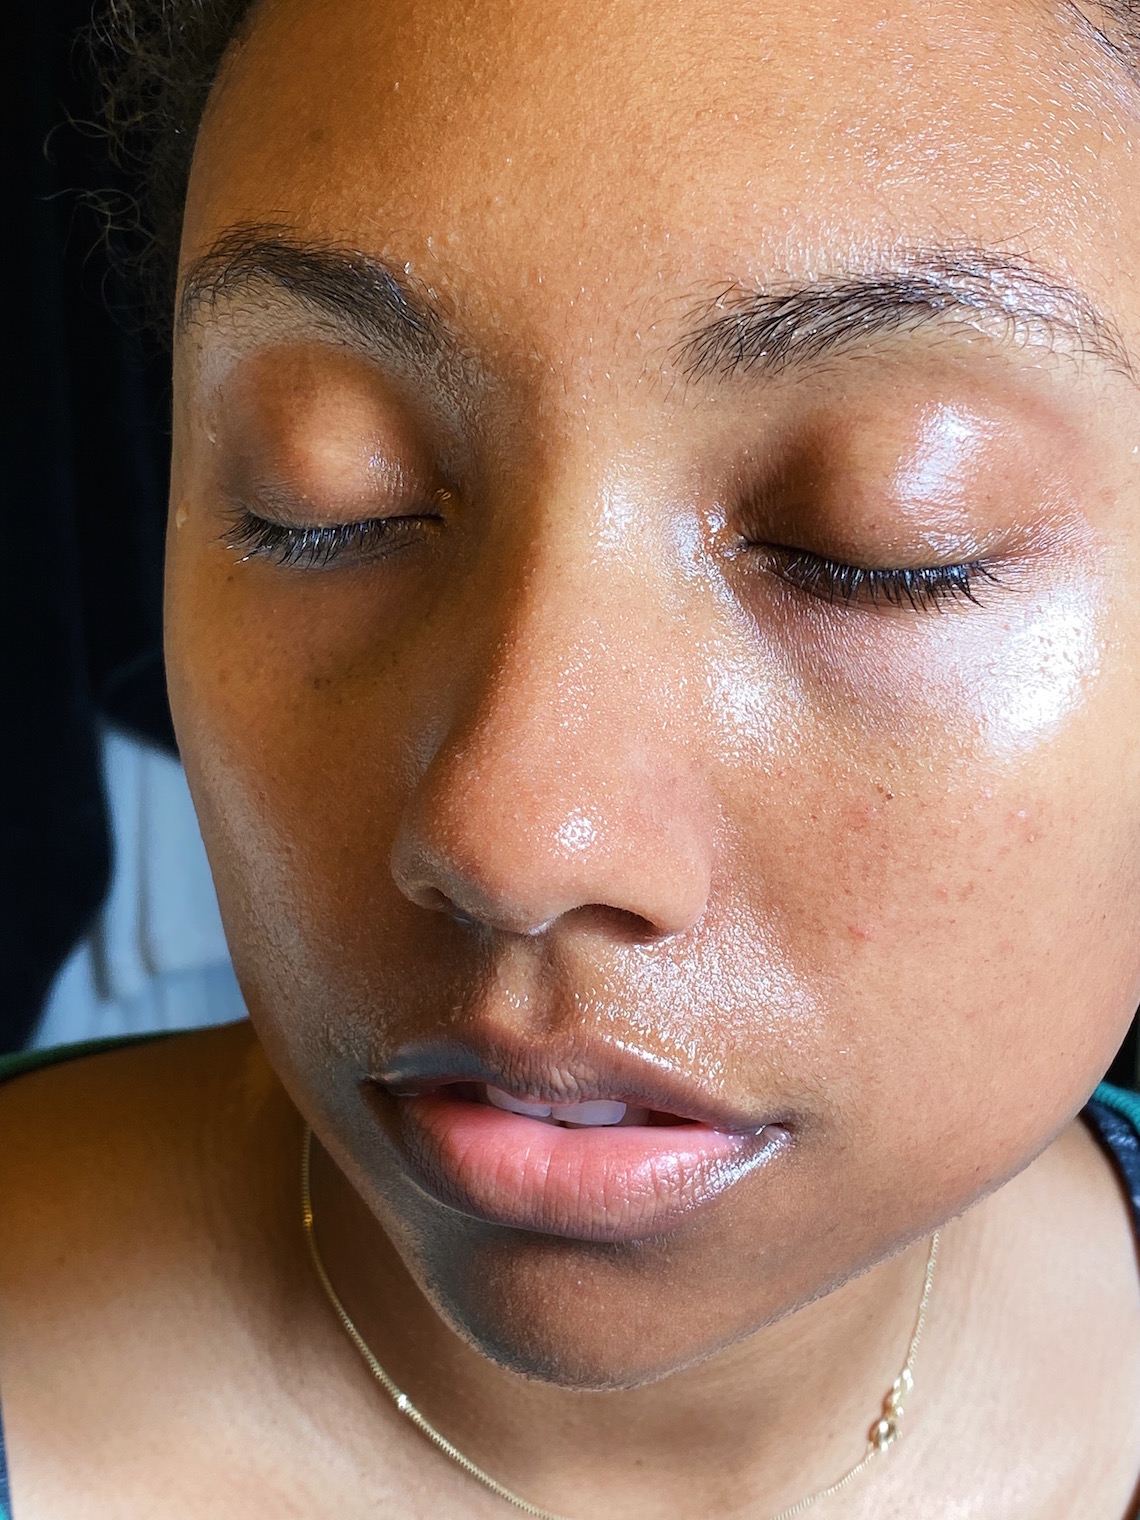 rinsed face-wet face-skin care routine